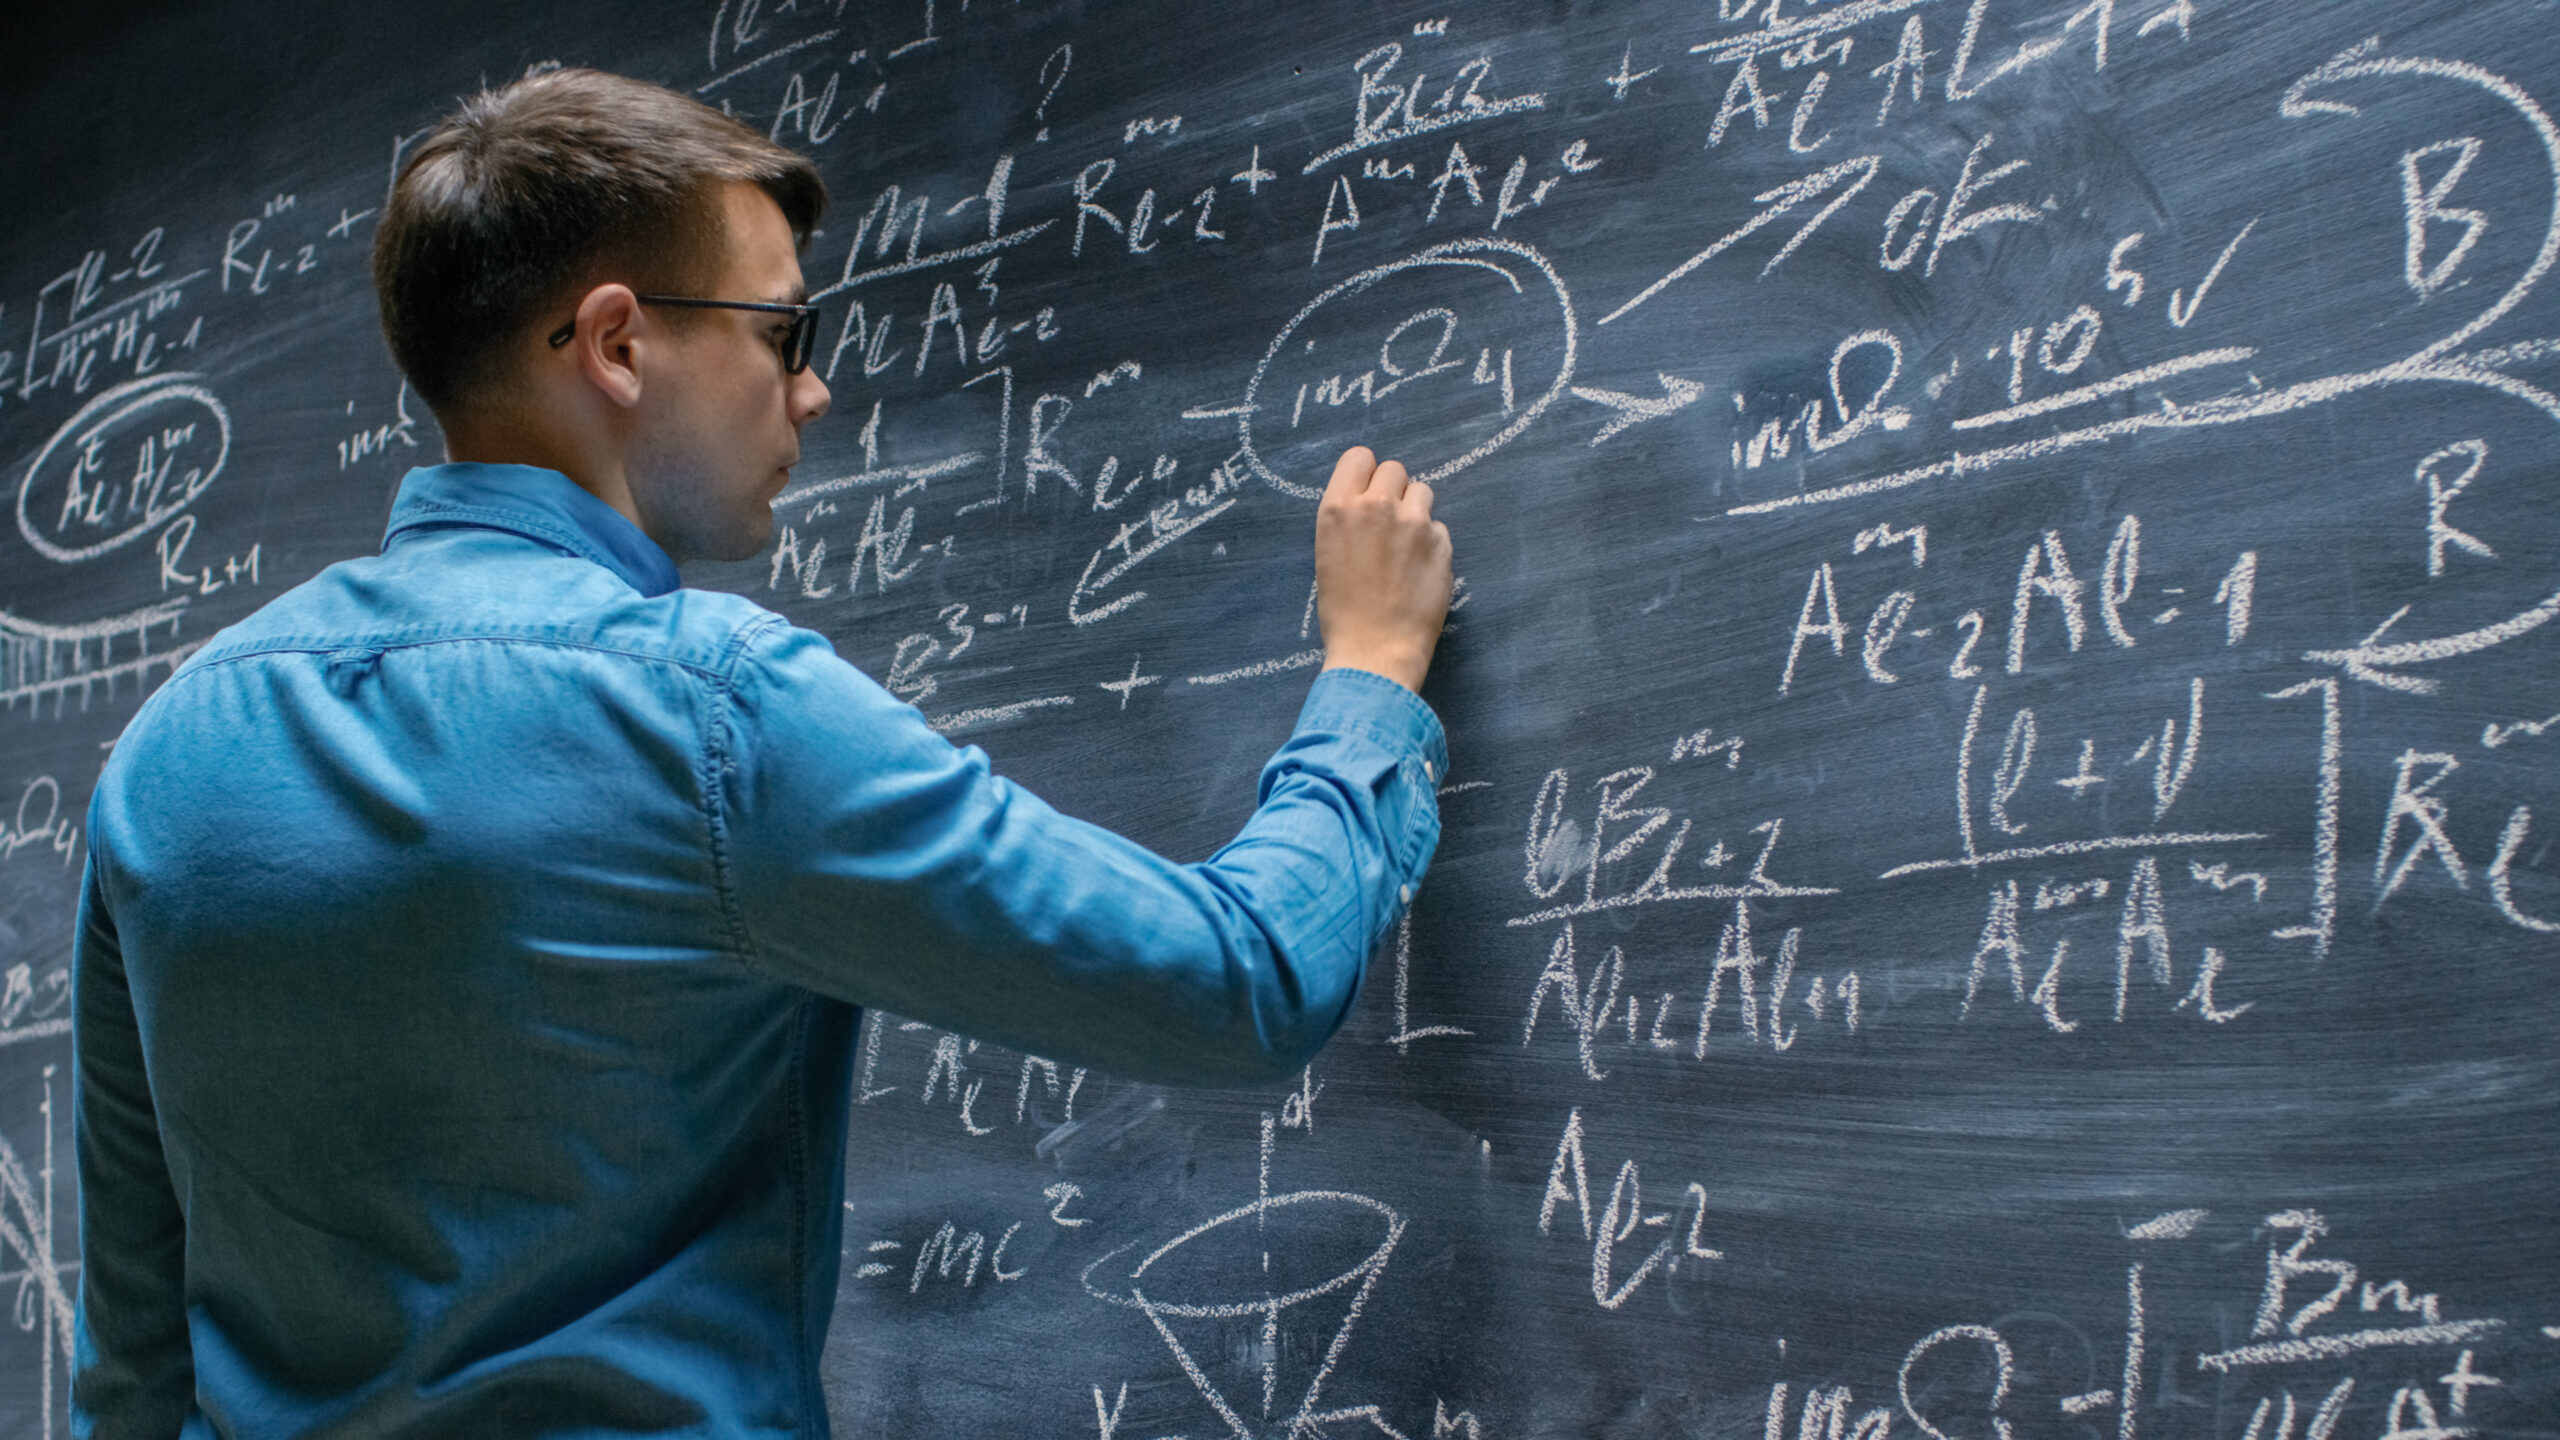 <p><span>With their strong analytical and problem-solving skills, majors in Mathematics are highly sought after. Mathematics majors have limitless possibilities and can find job opportunities in finance, technology, research, or data analysis. Mathematicians help to make sound decisions and often earn competitive salaries.</span></p>